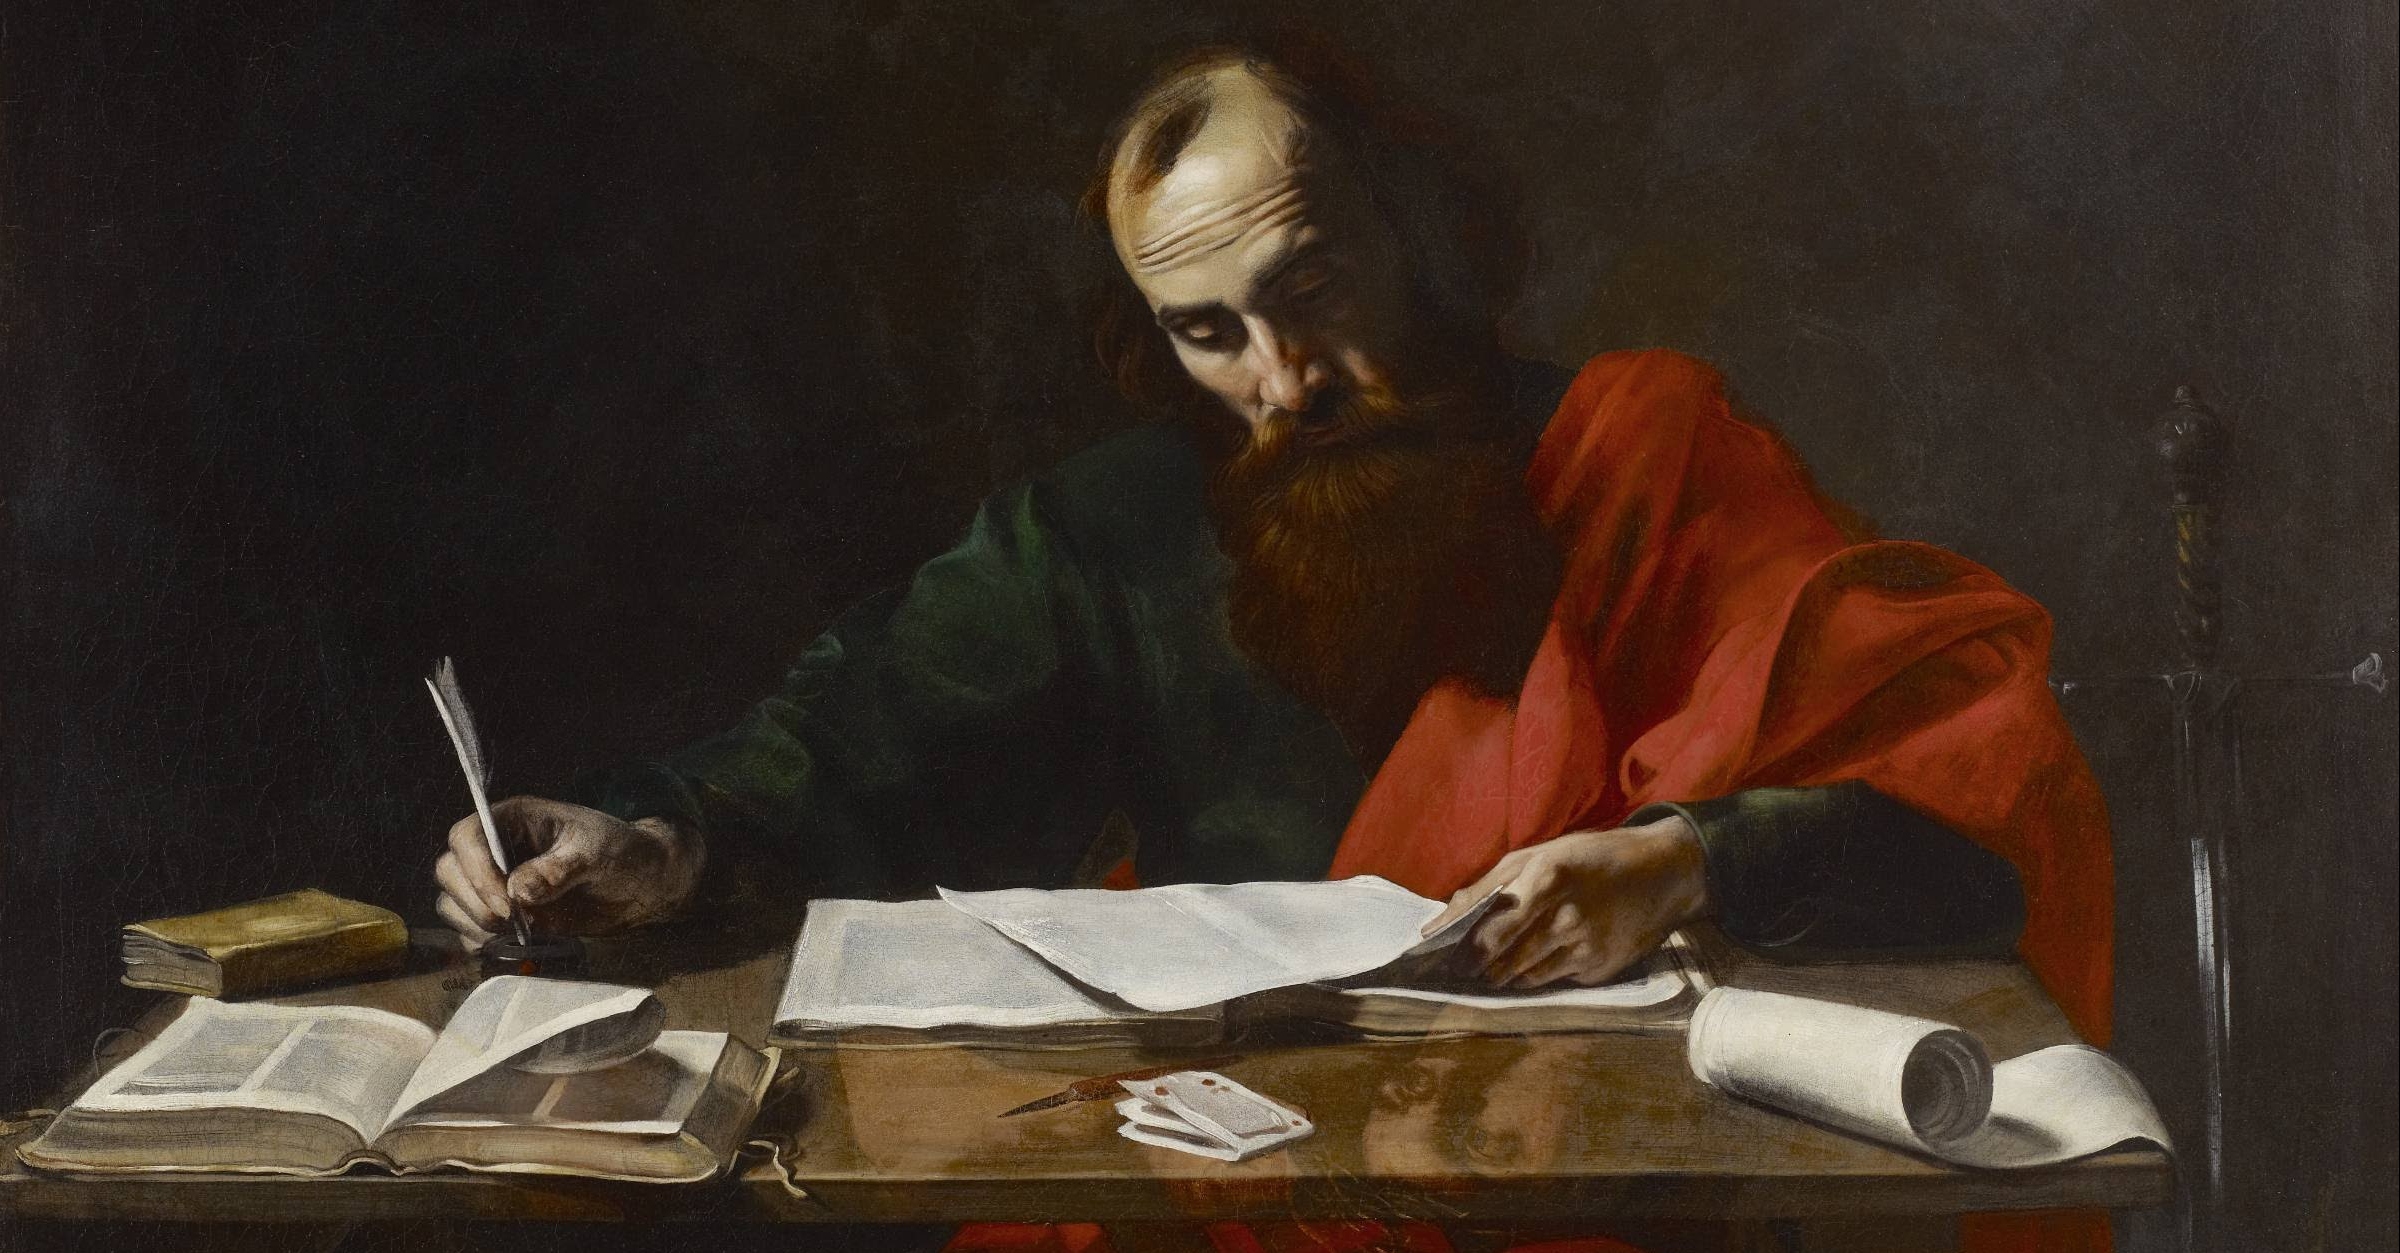 Painting of the Apostle Paul, speaking in tongues